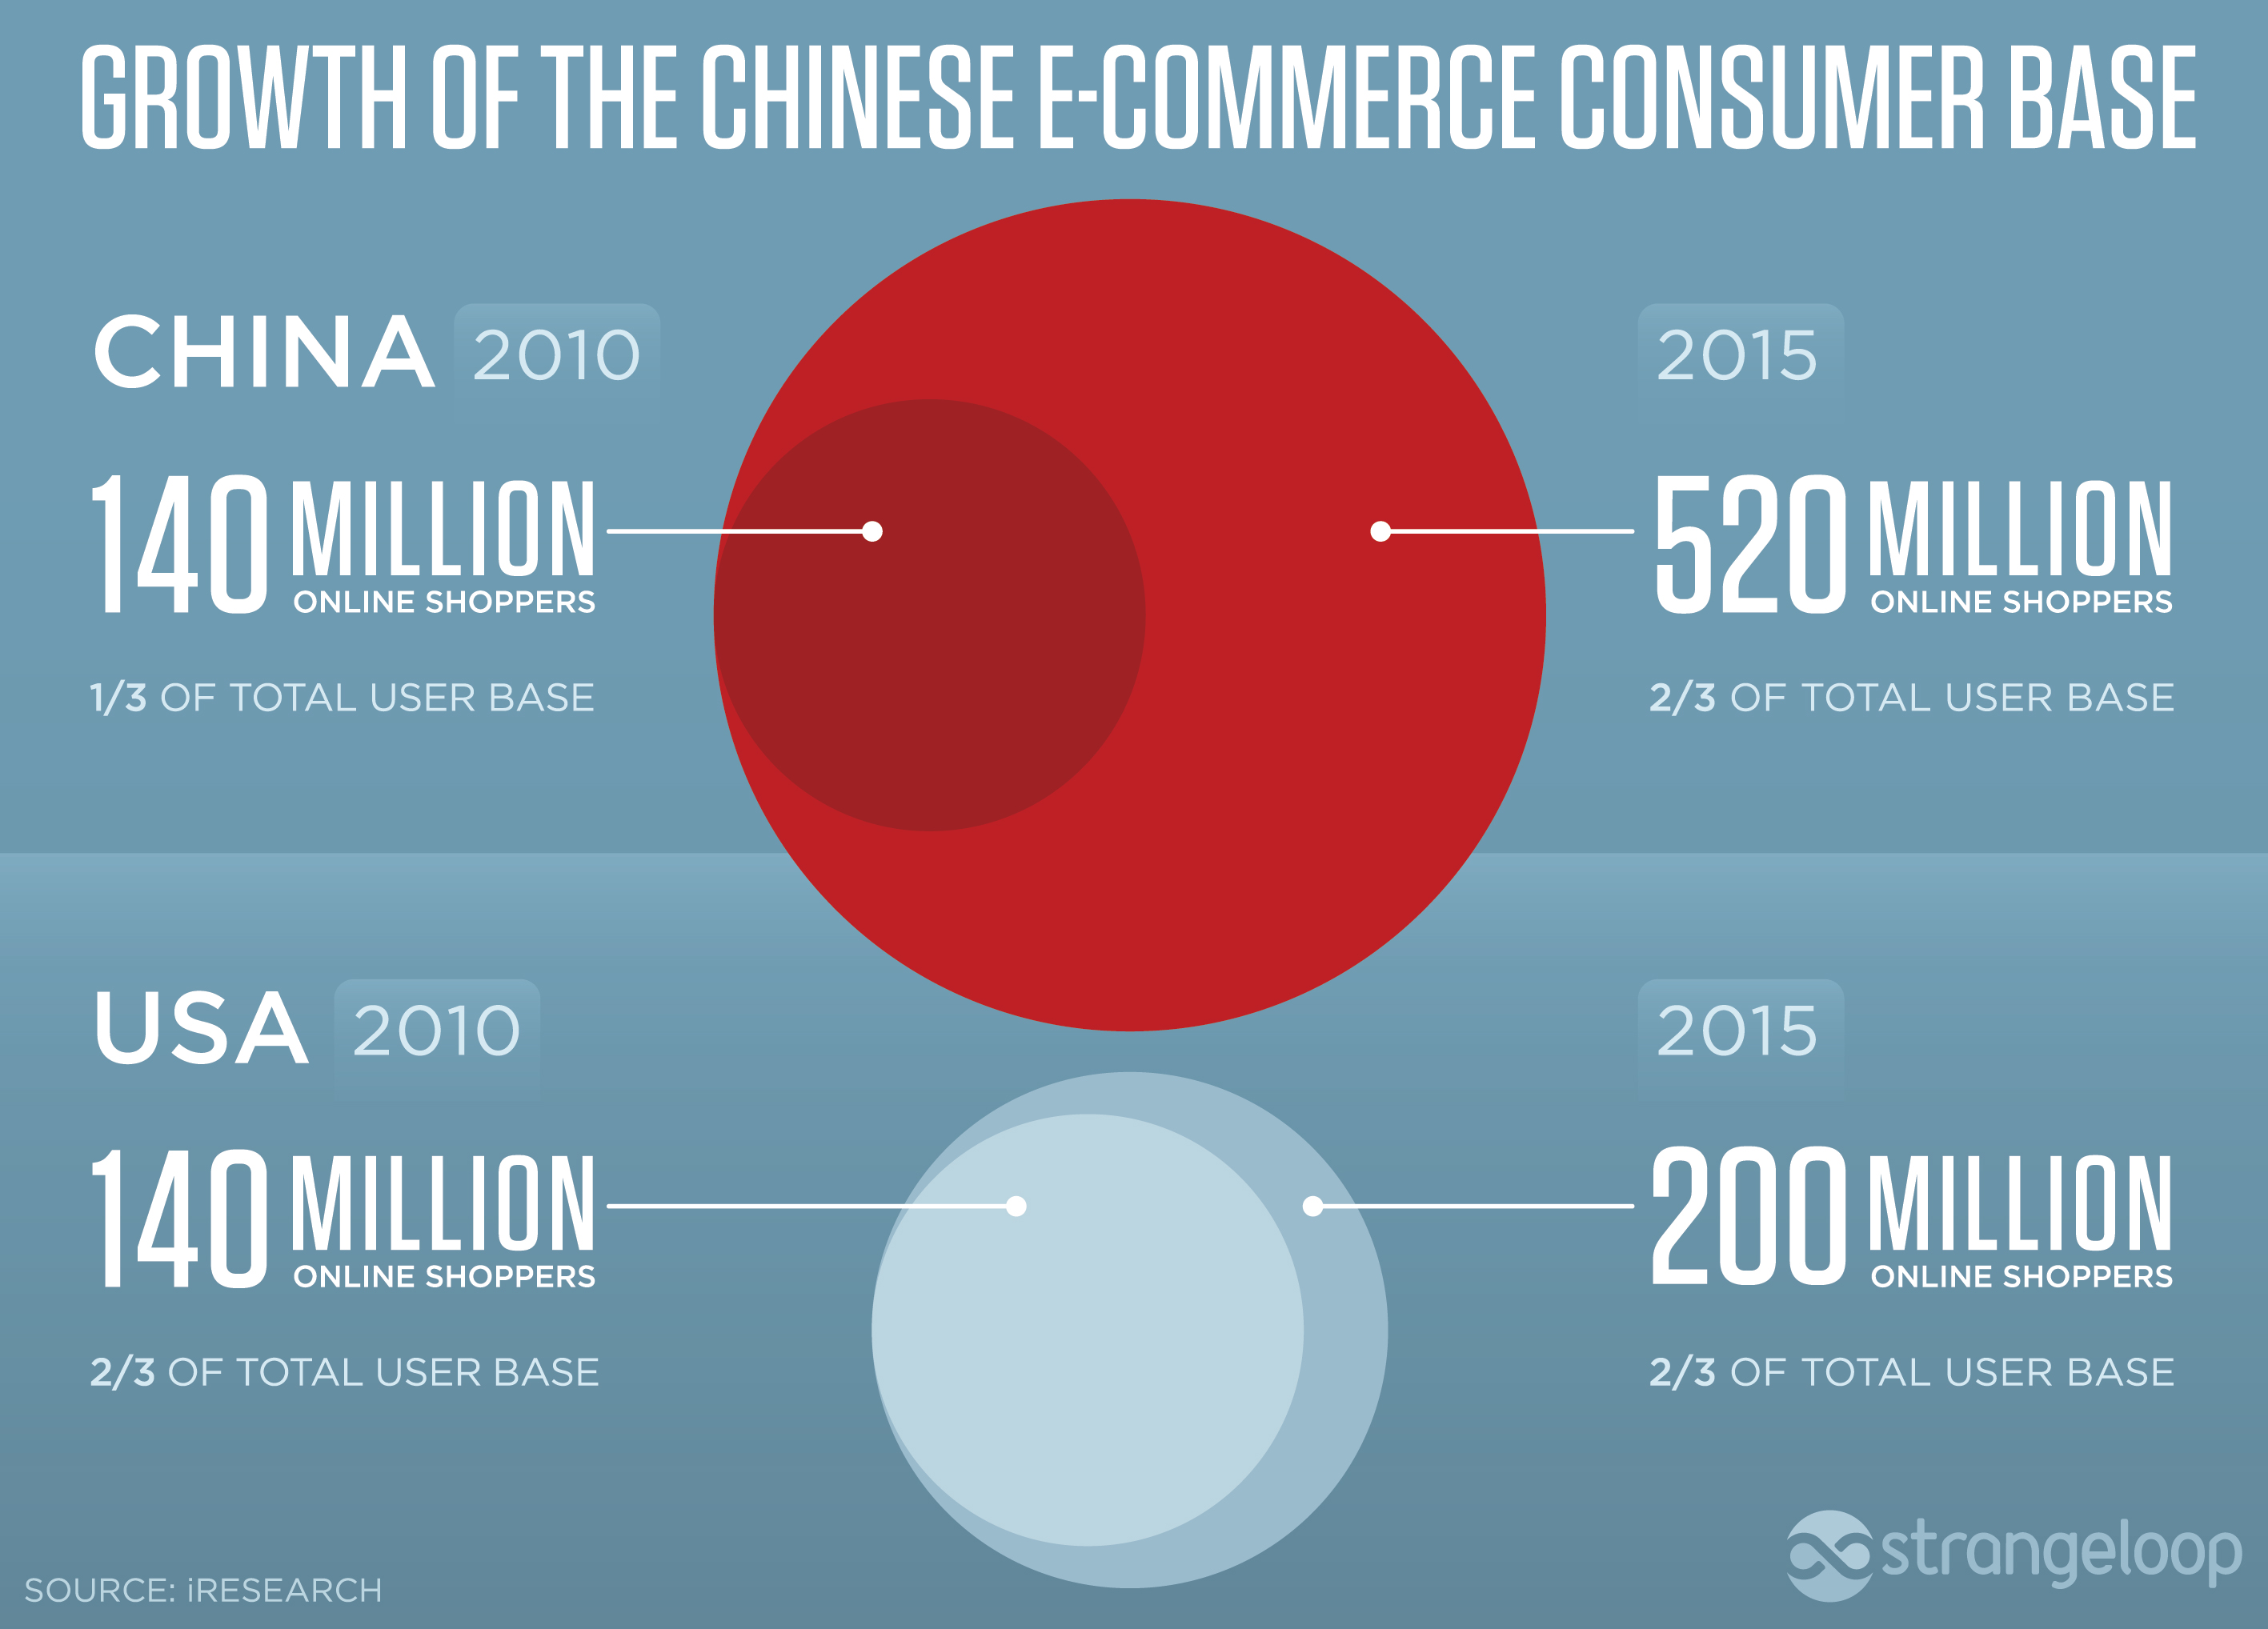 10 key factors of success for E-Commerce in China